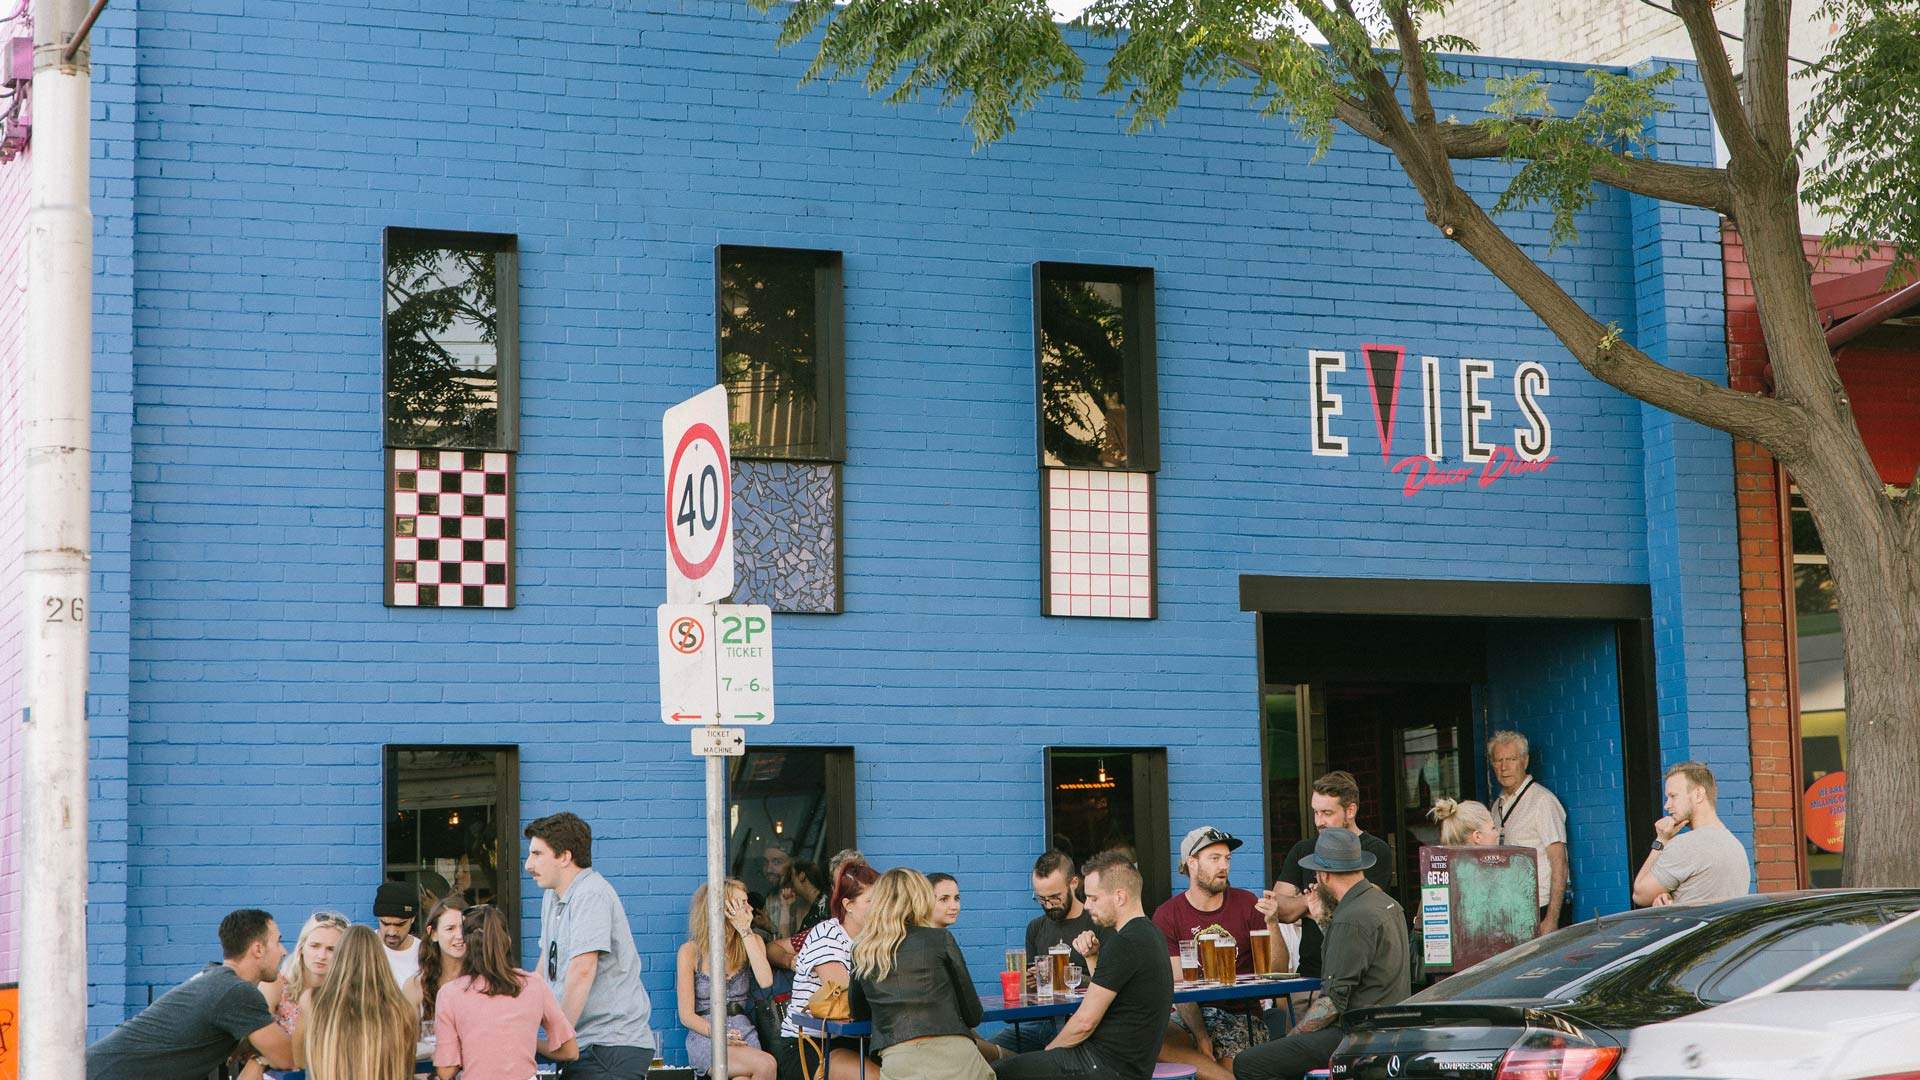 A group of people drinking outside Evies Diner in Fitzroy - near Smith Street